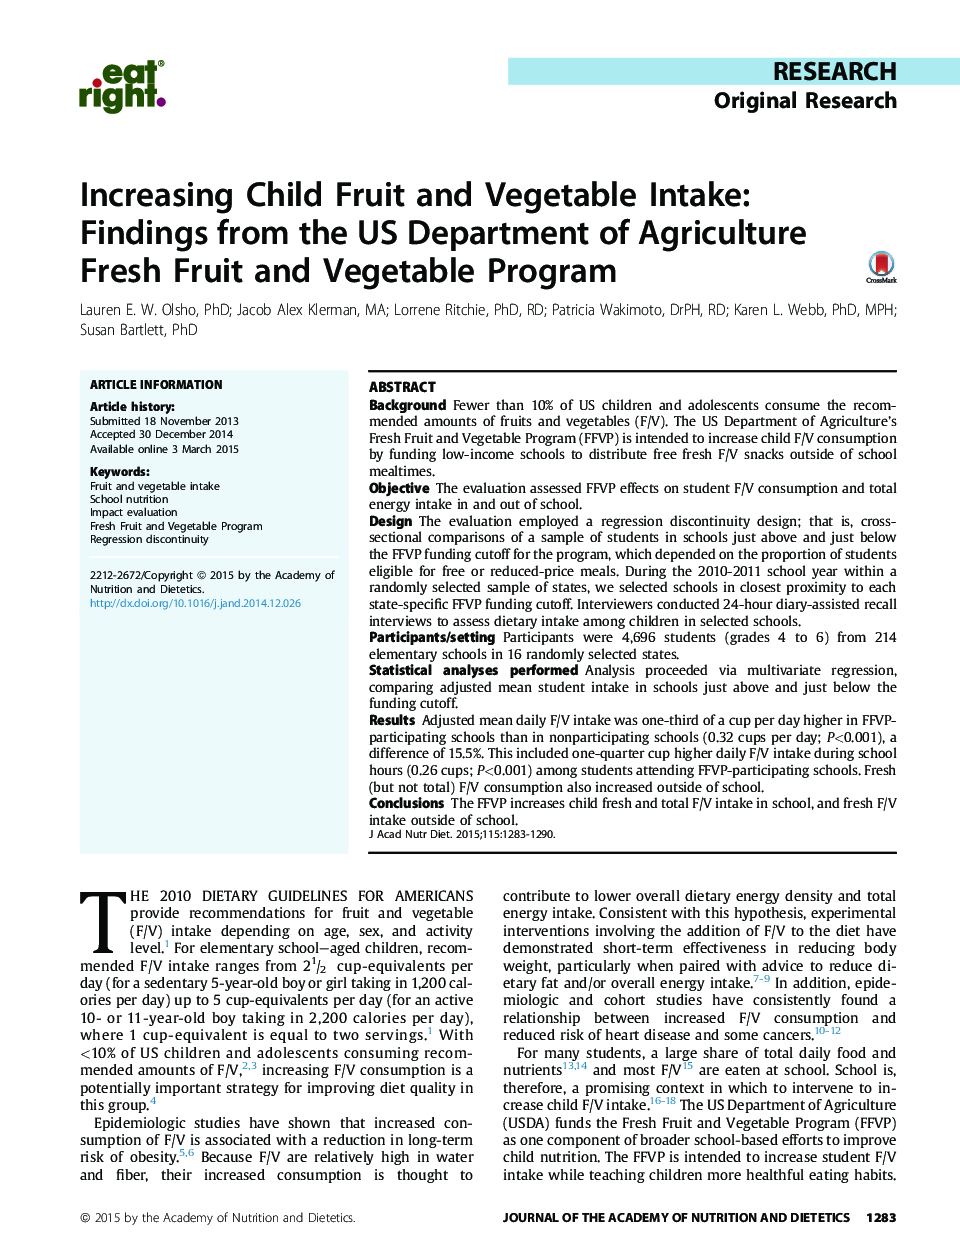 ResearchOriginal ResearchIncreasing Child Fruit and Vegetable Intake: Findings from the US Department of Agriculture Fresh Fruit and Vegetable Program